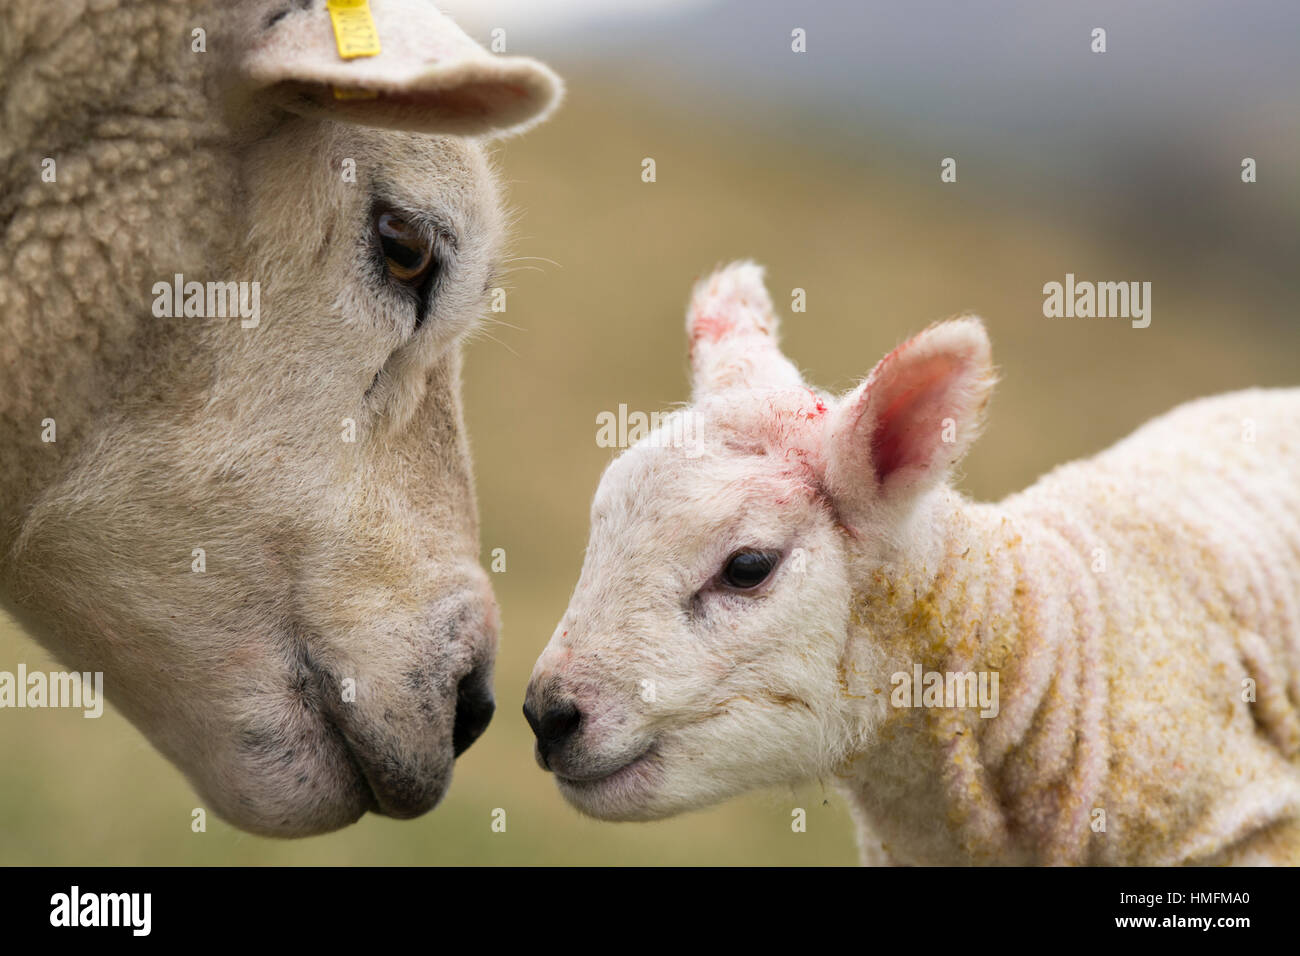 Newborn texel lambs being licked clean by ewe. North Yorkshire, UK. Stock Photo